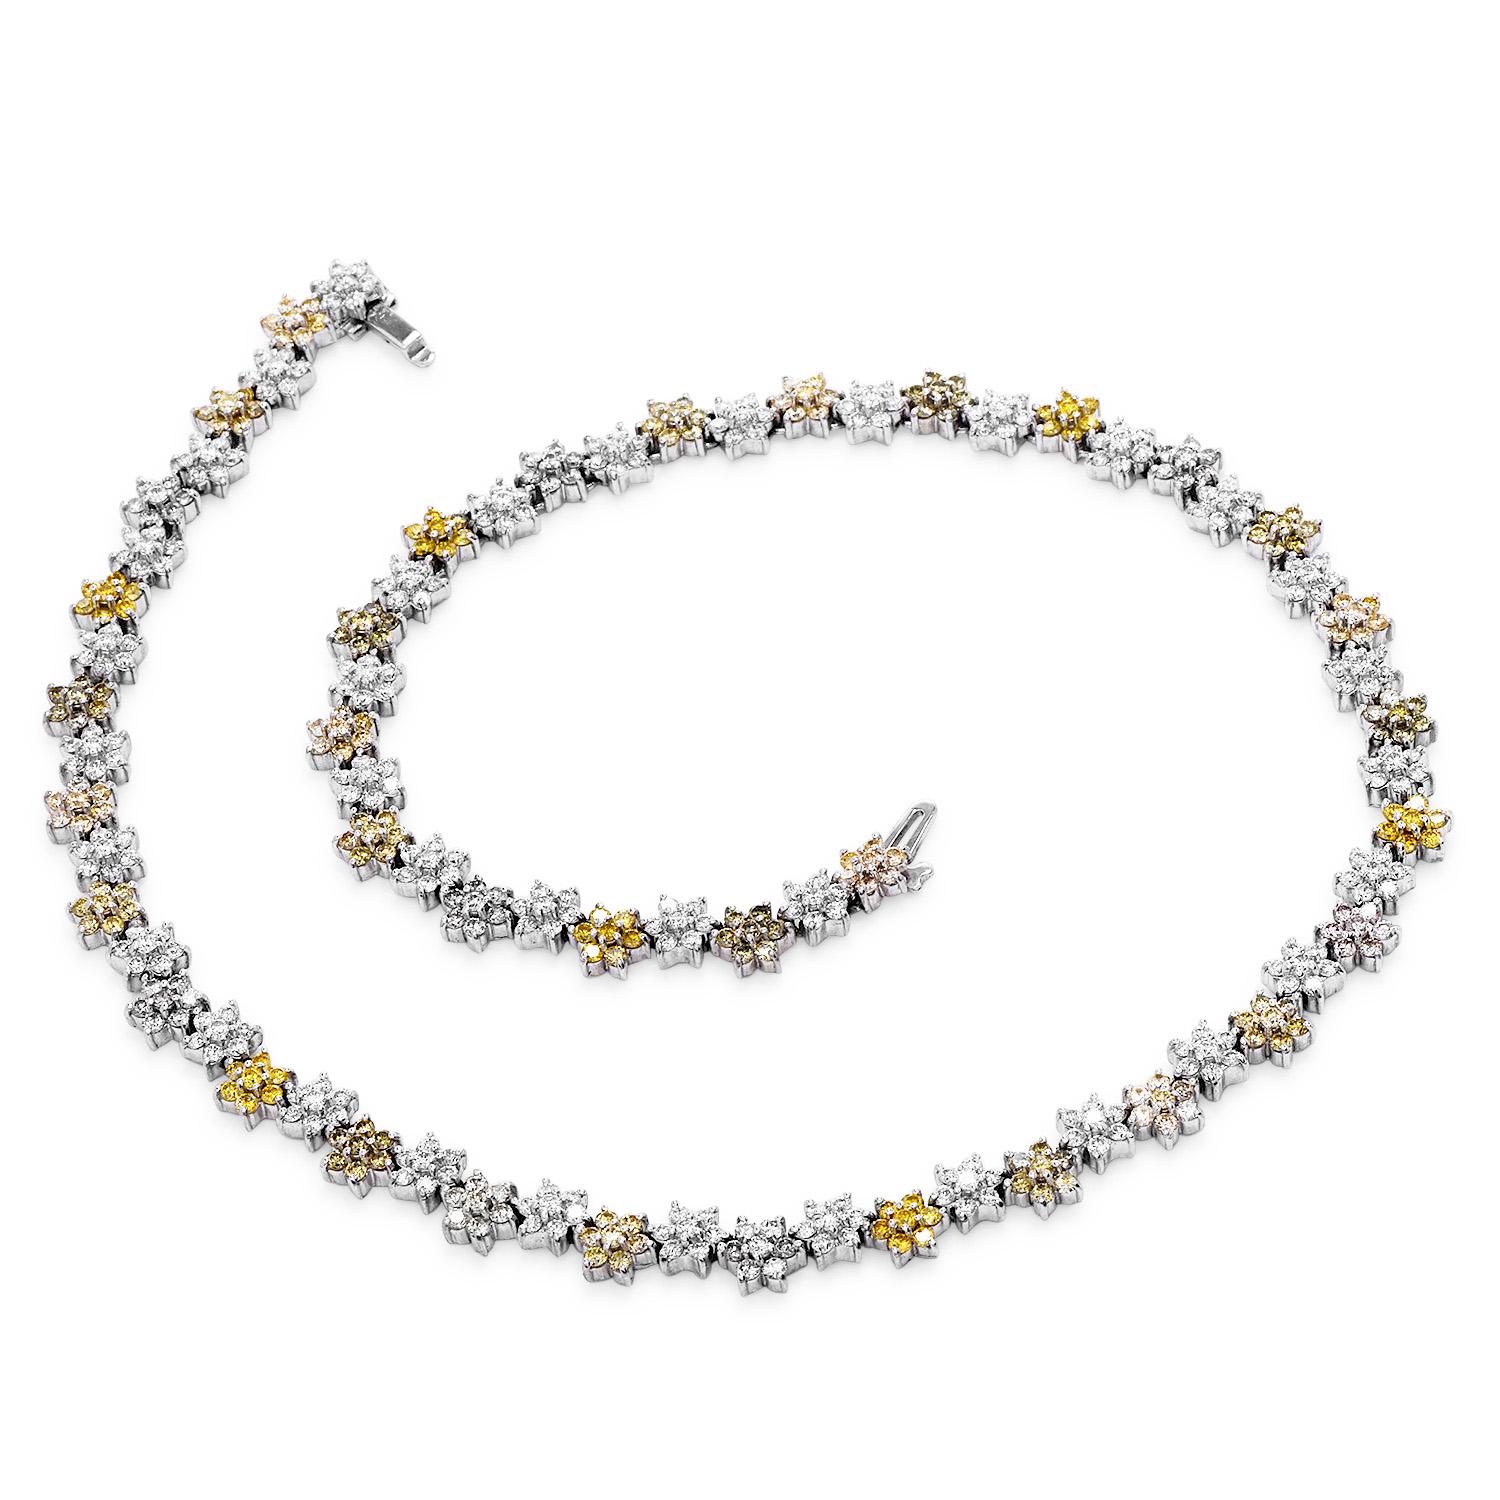 Colorful & highly sparkly diamonds adorn this flower-inspired link necklace.

This beautiful diamond necklace is crafted in 18K white gold, weighing 38.3 grams and measuring 16” long.

Composed by joyful natural fancy yellow, light pink-orange,